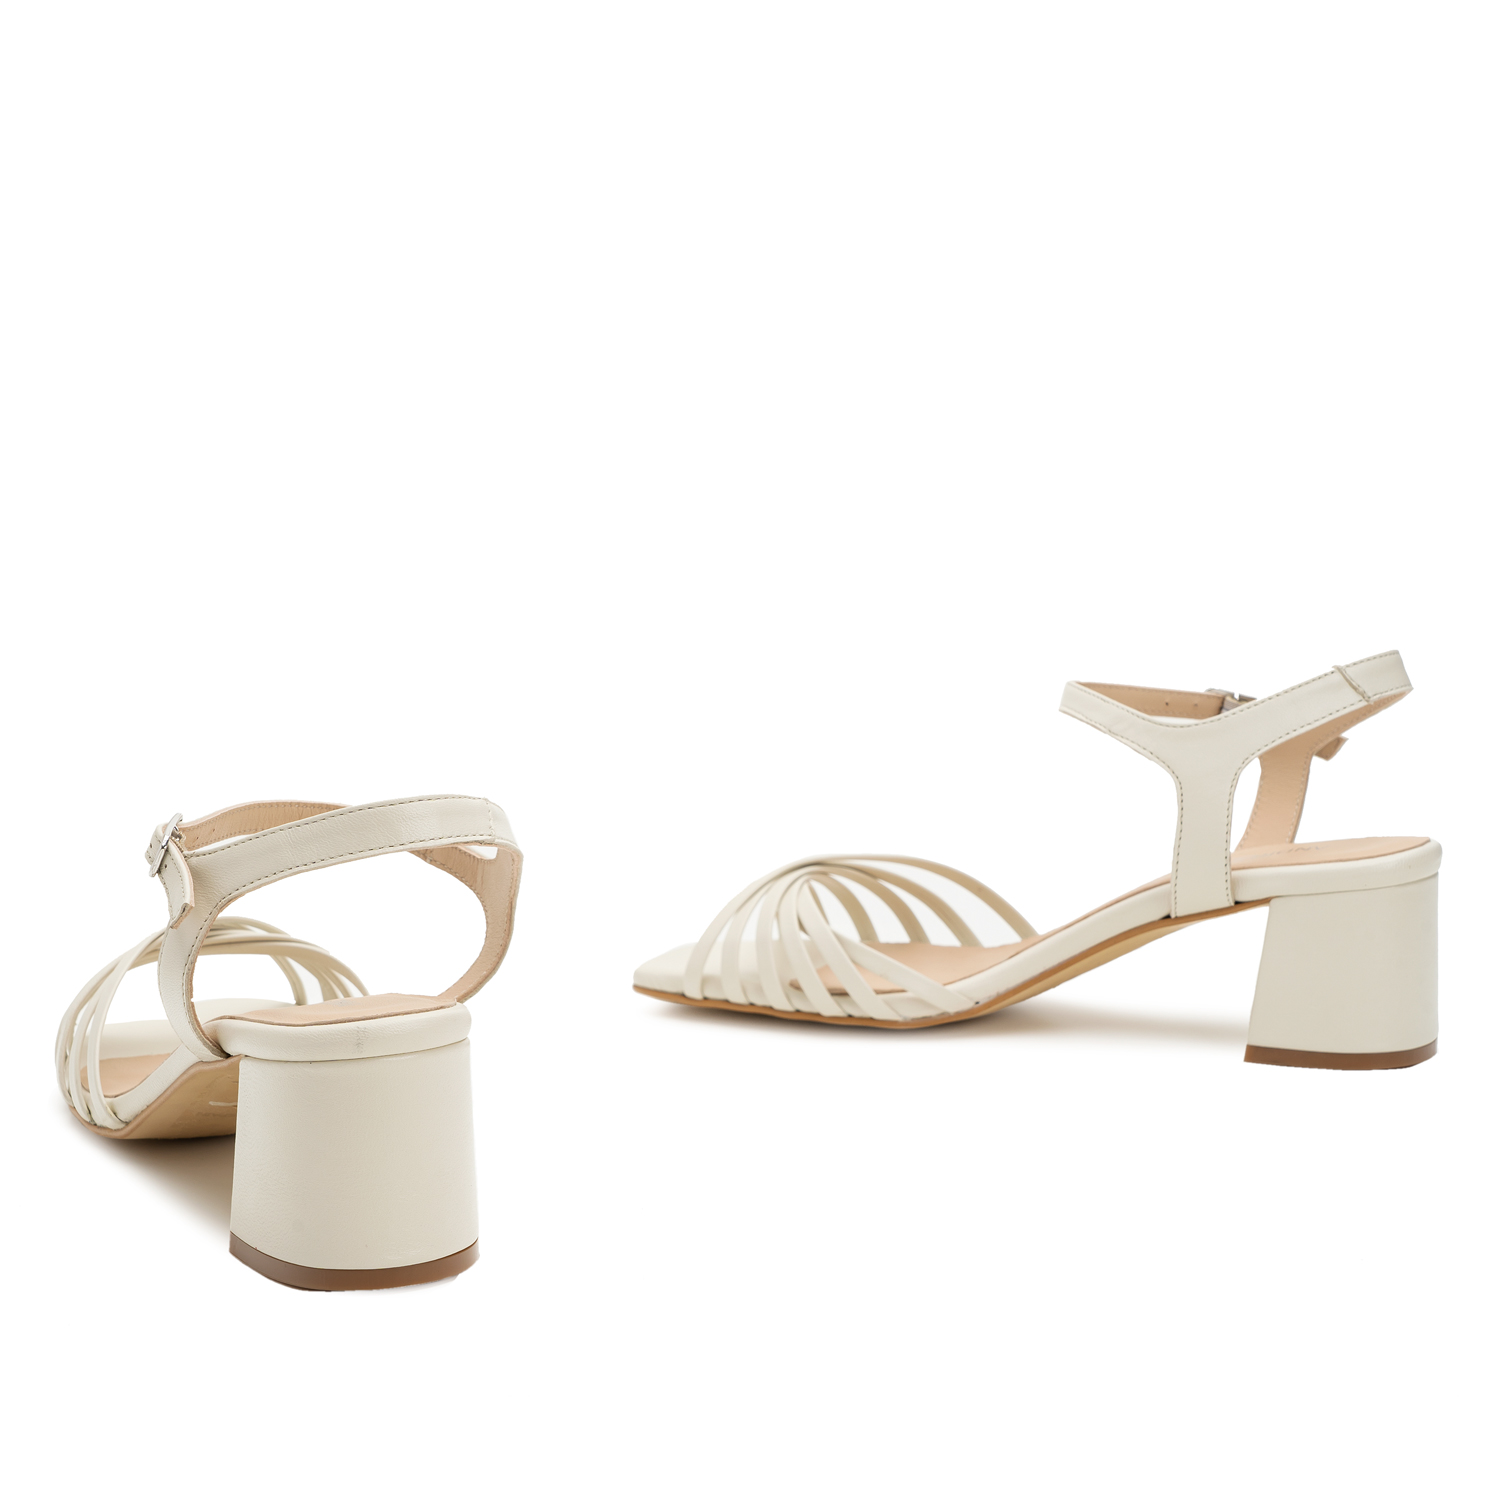 Strapped Sandals in Off White Leather 